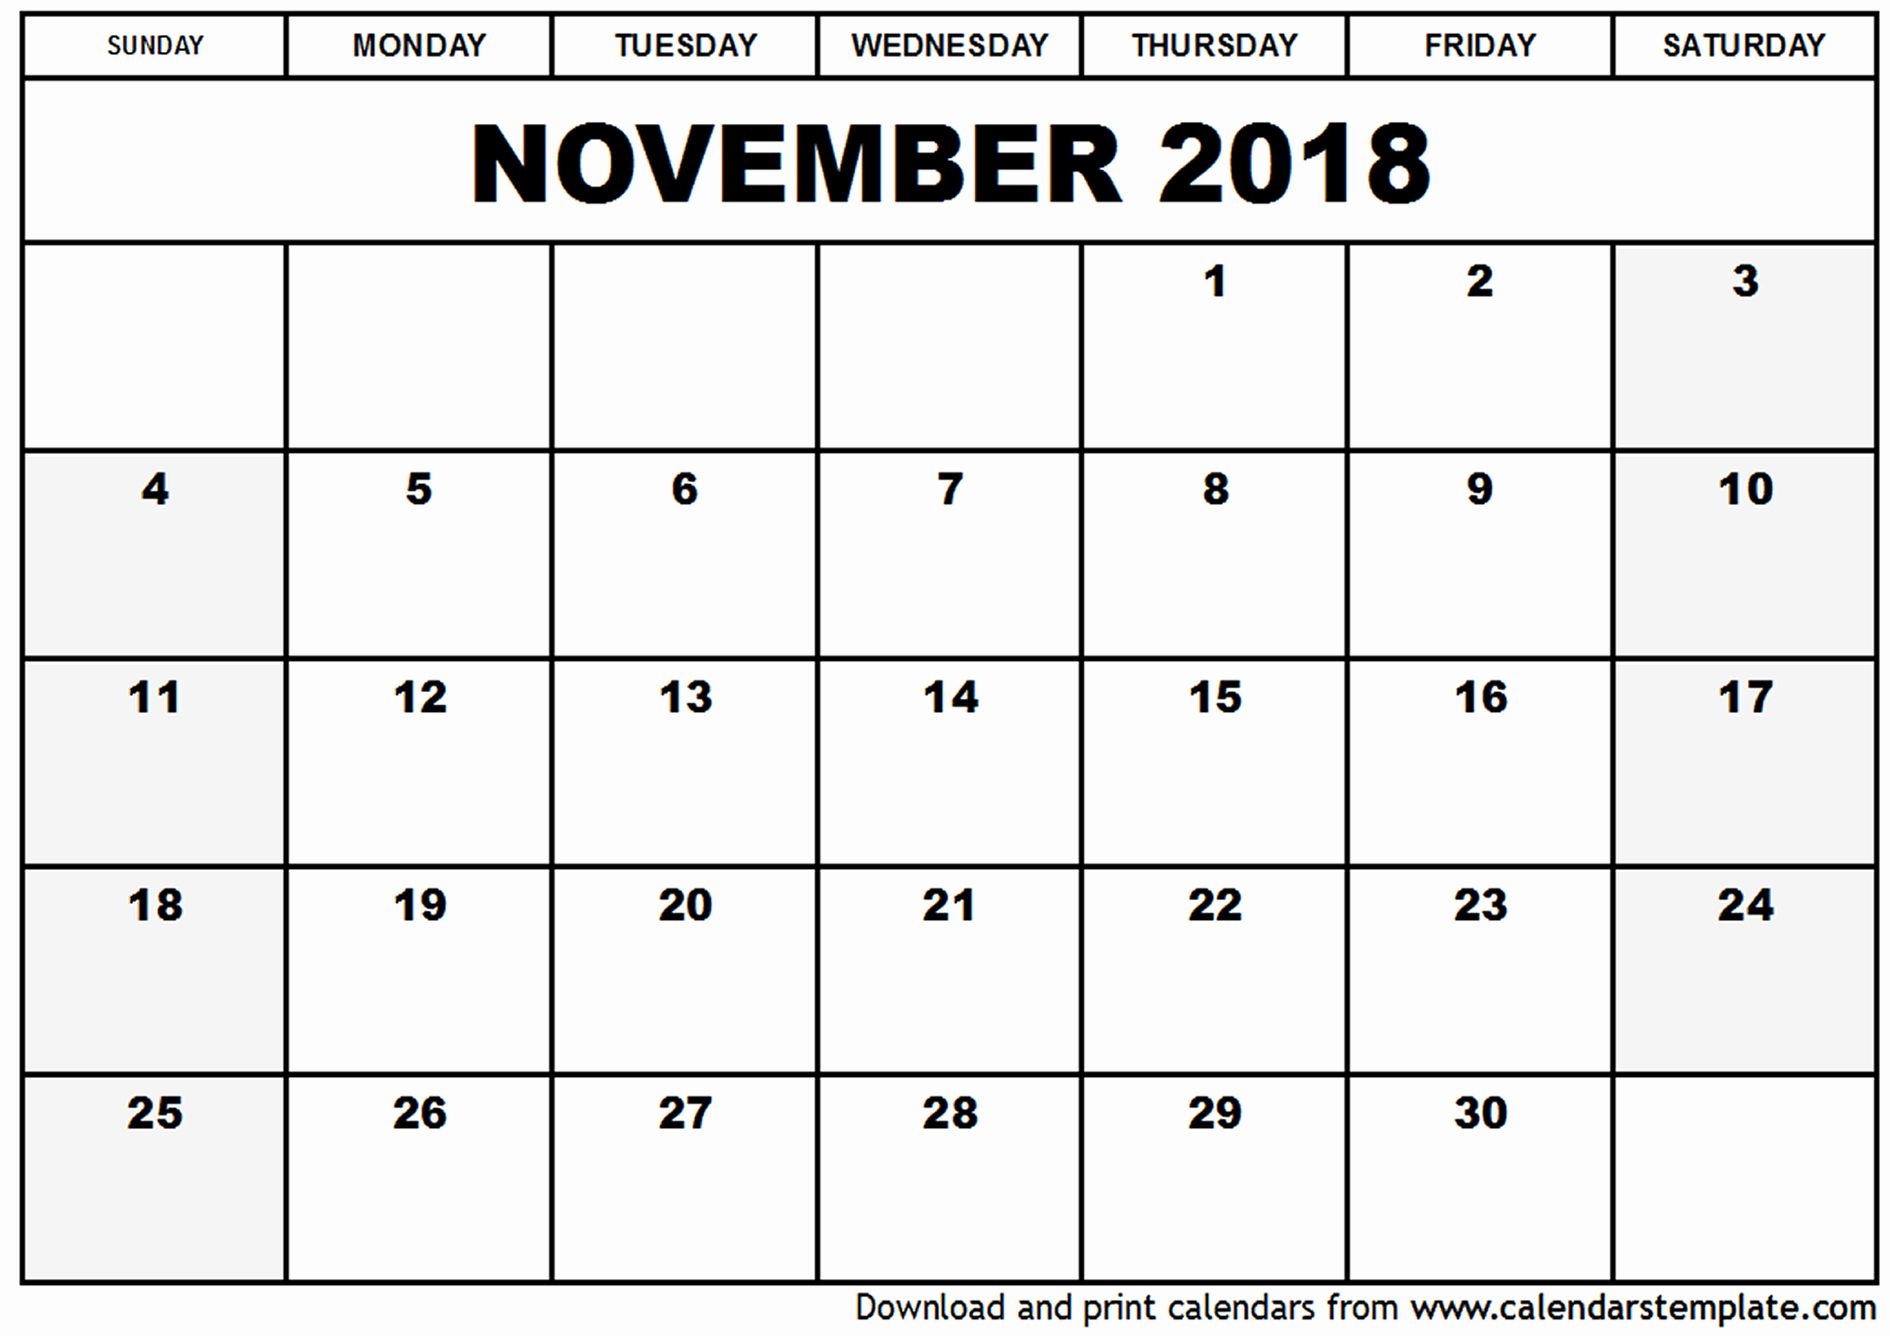 calendar-november-2018-uk-with-excel-word-and-pdf-templates